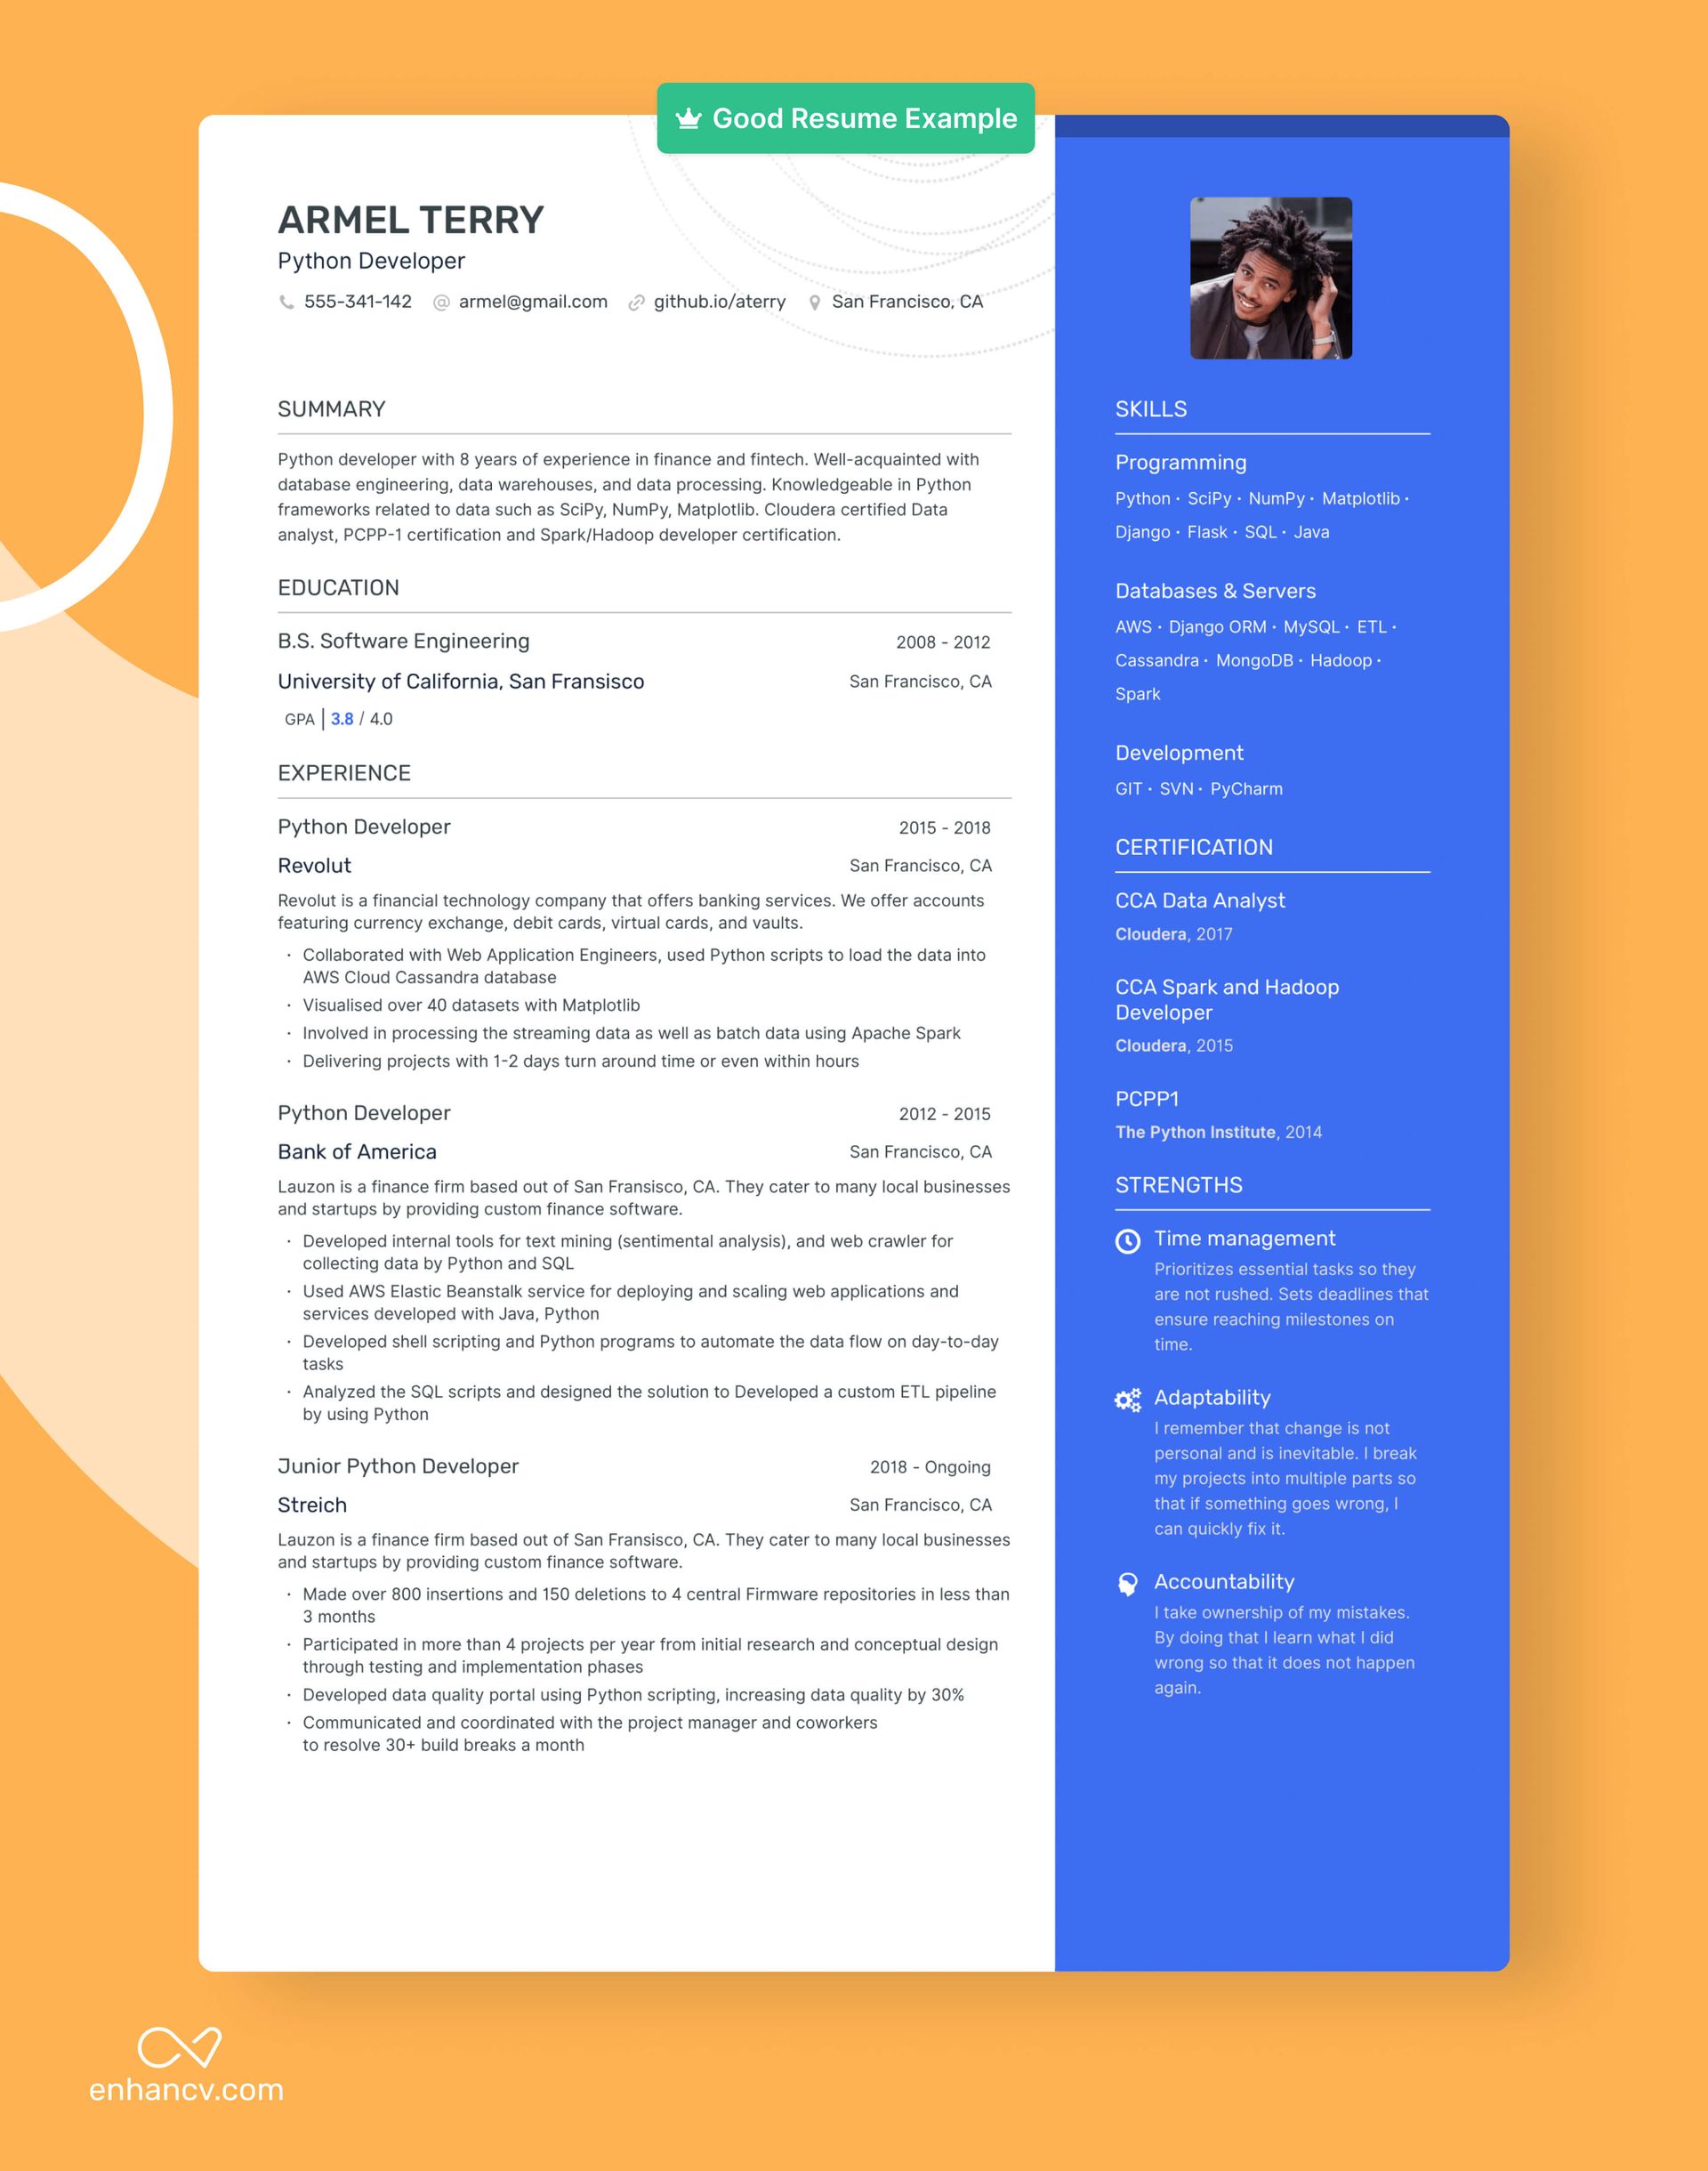 color resume example resume tips.jpg